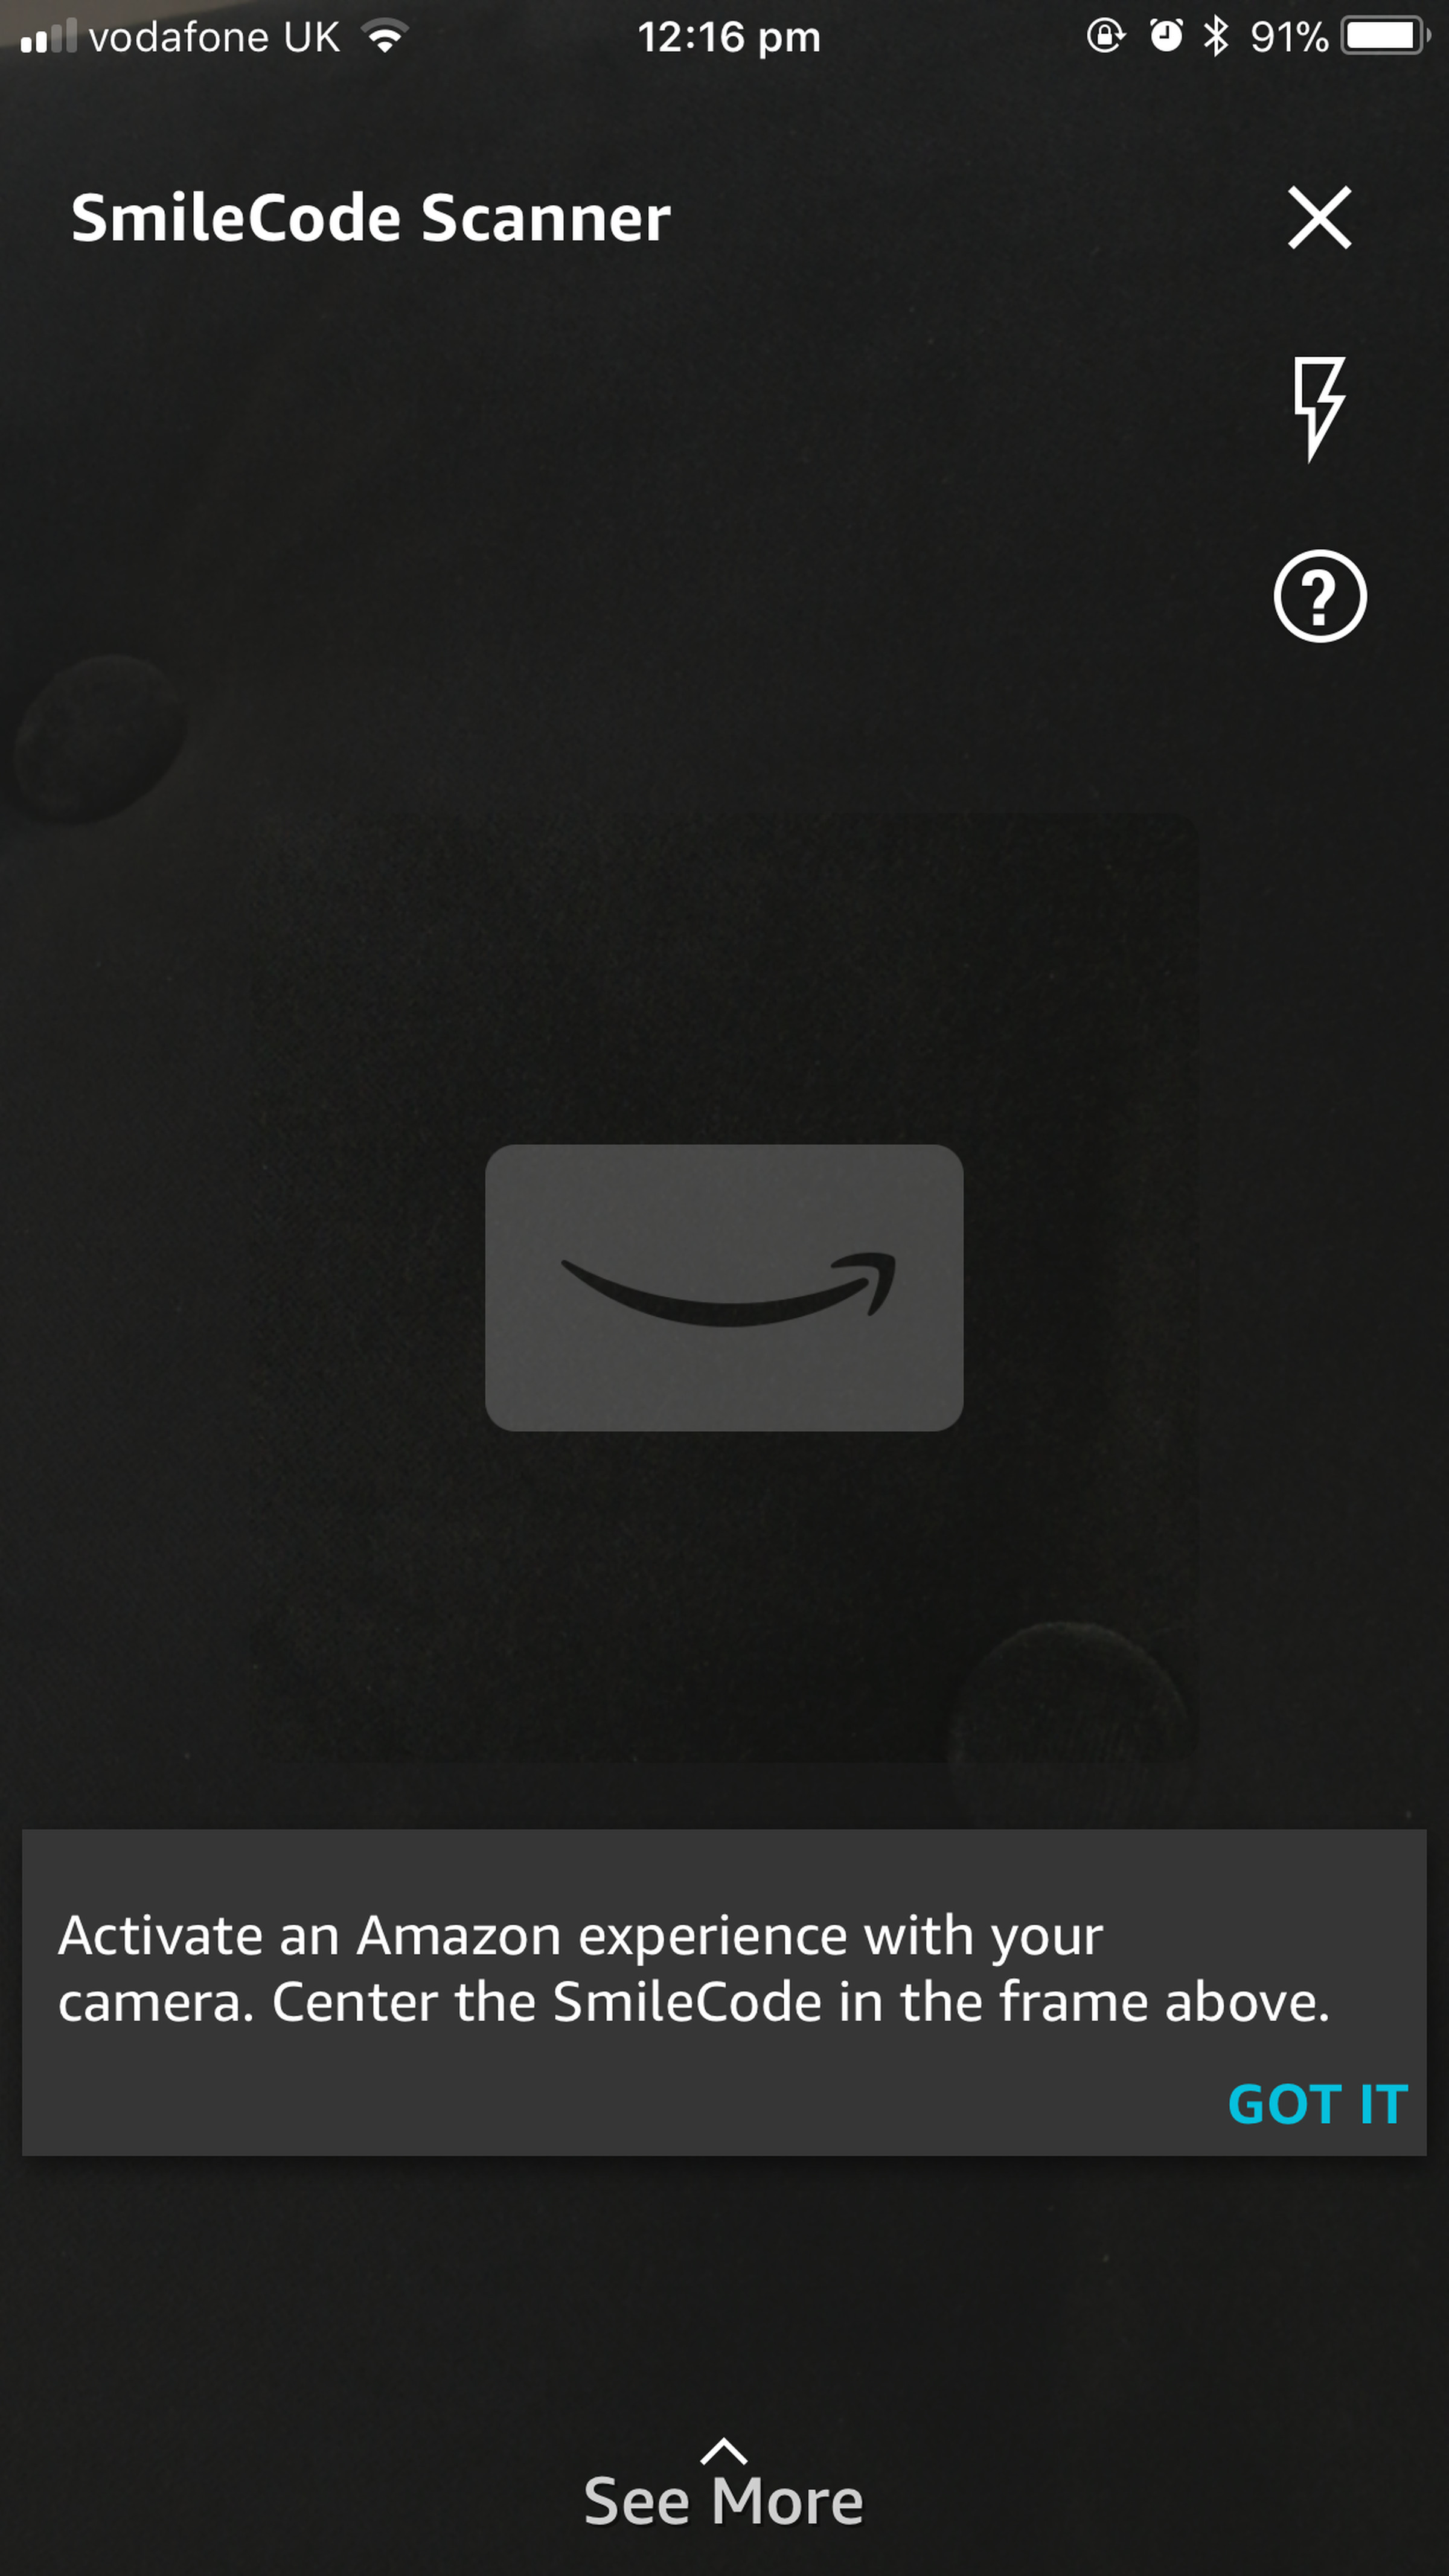 The SmileCode Scanner feature in the Amazon app.